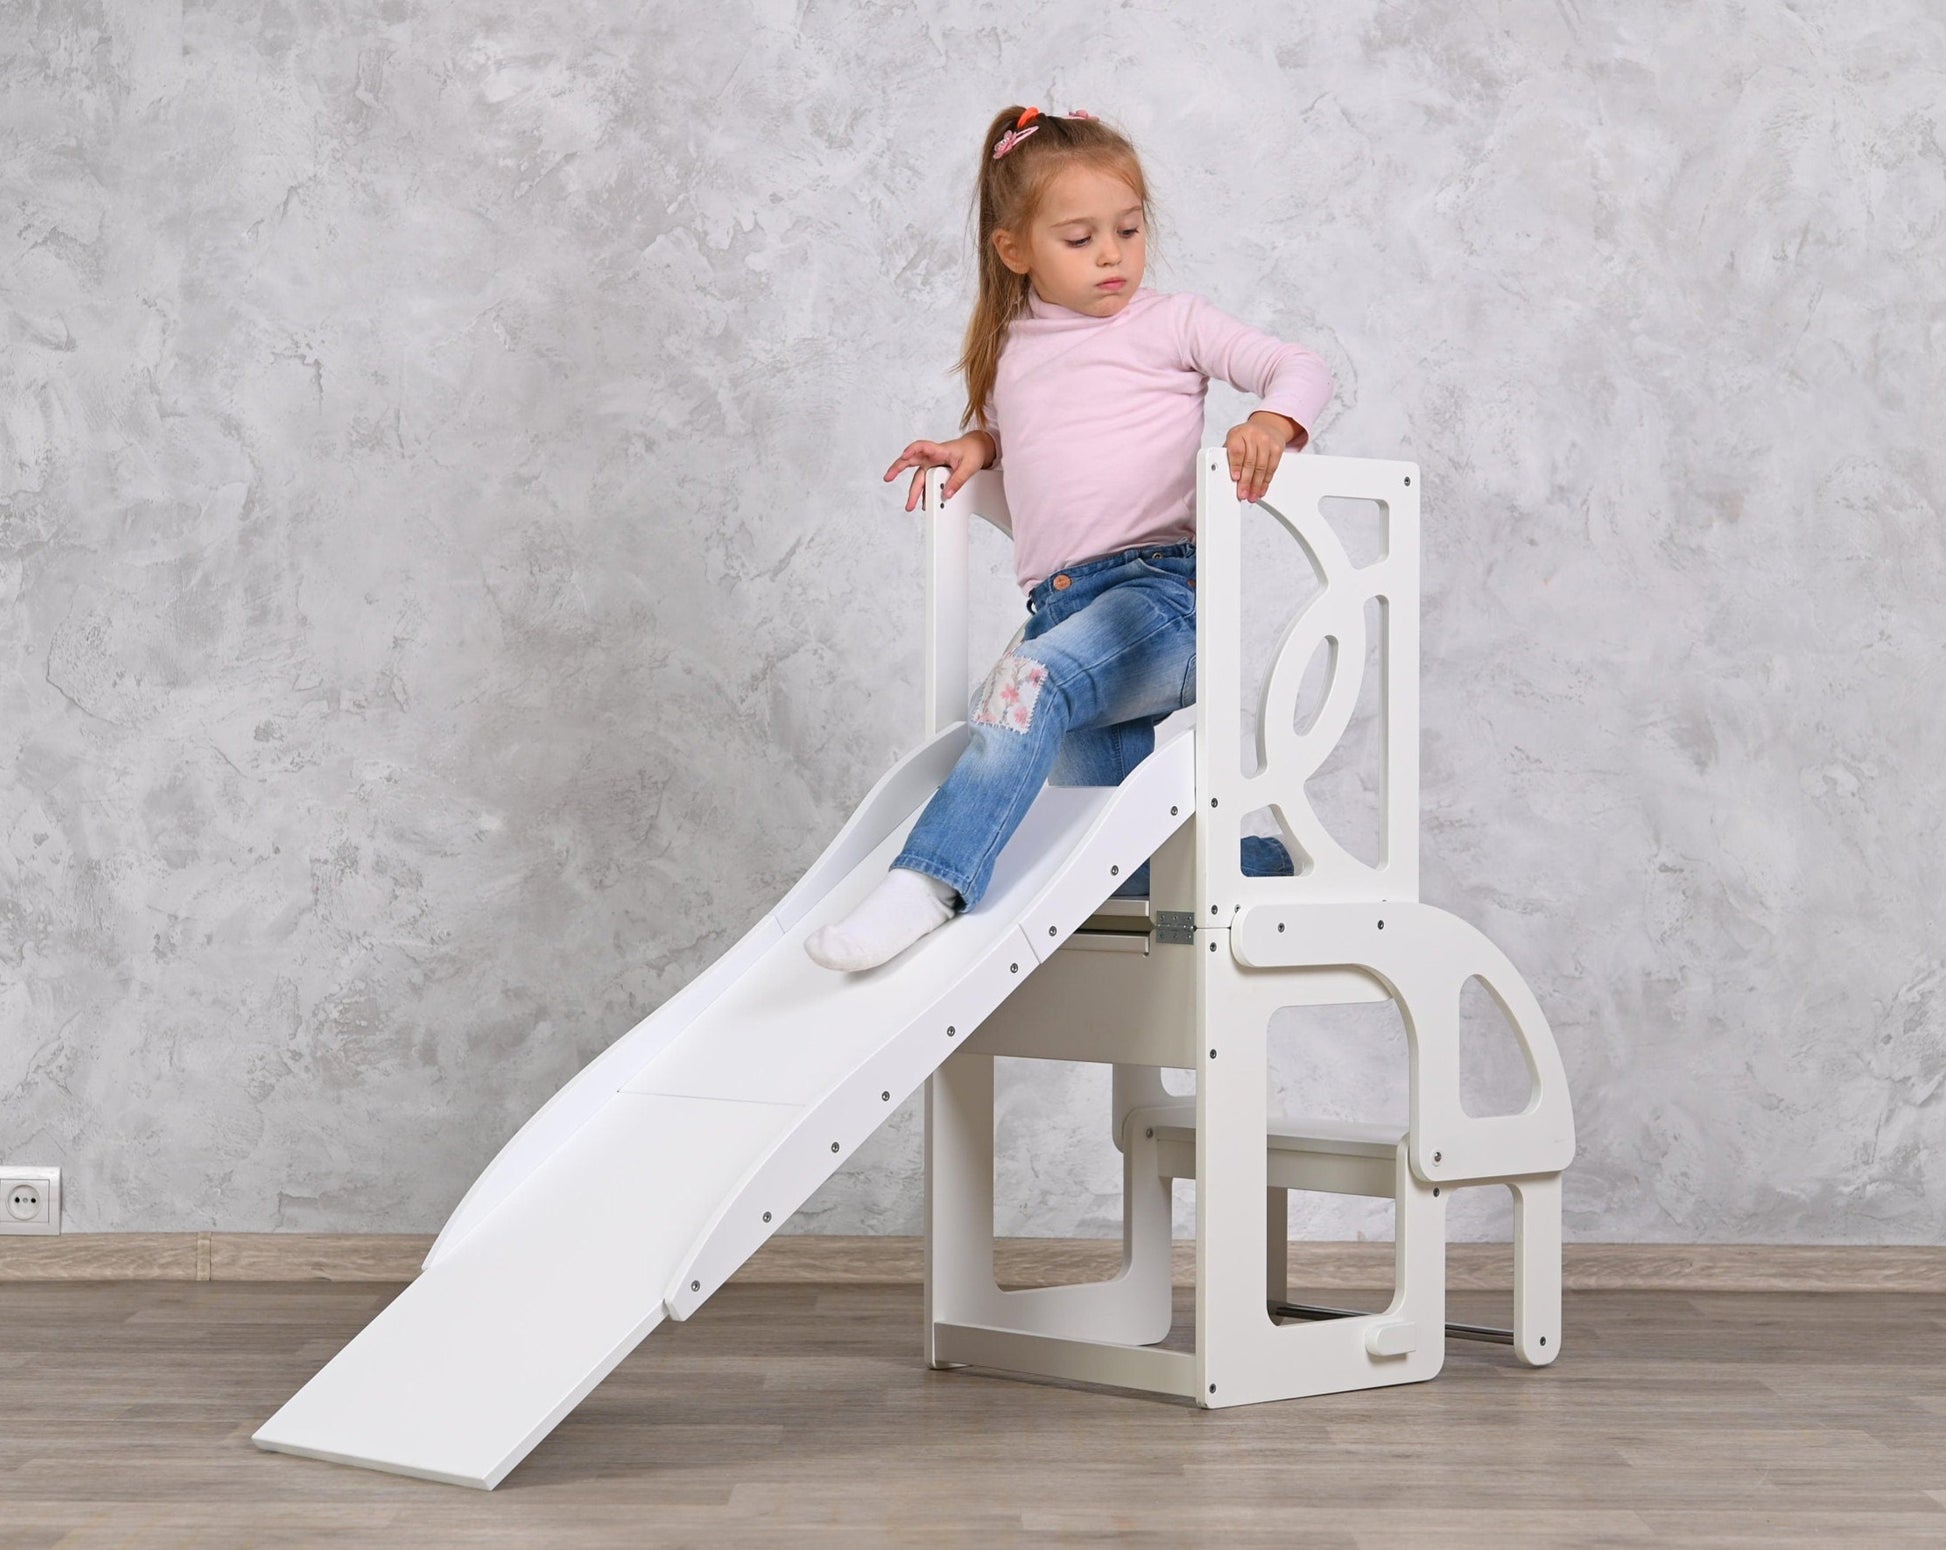 Toddler tower convertible, natural learning toddler tower slide